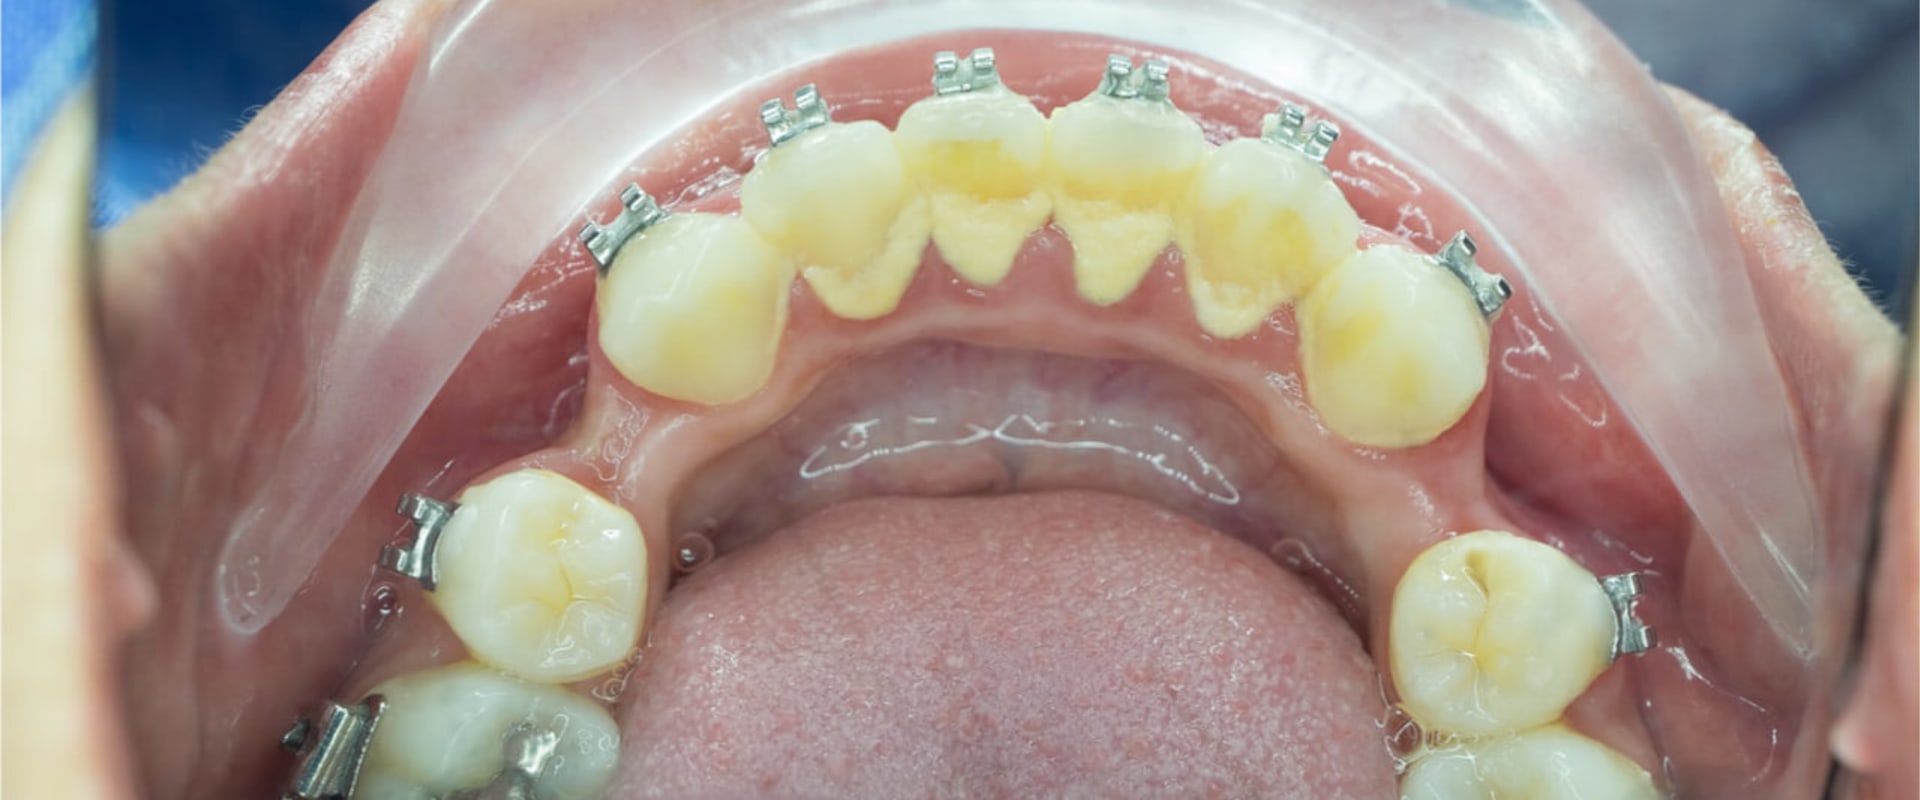 Can I Get Braces If I Have Periodontal Disease?